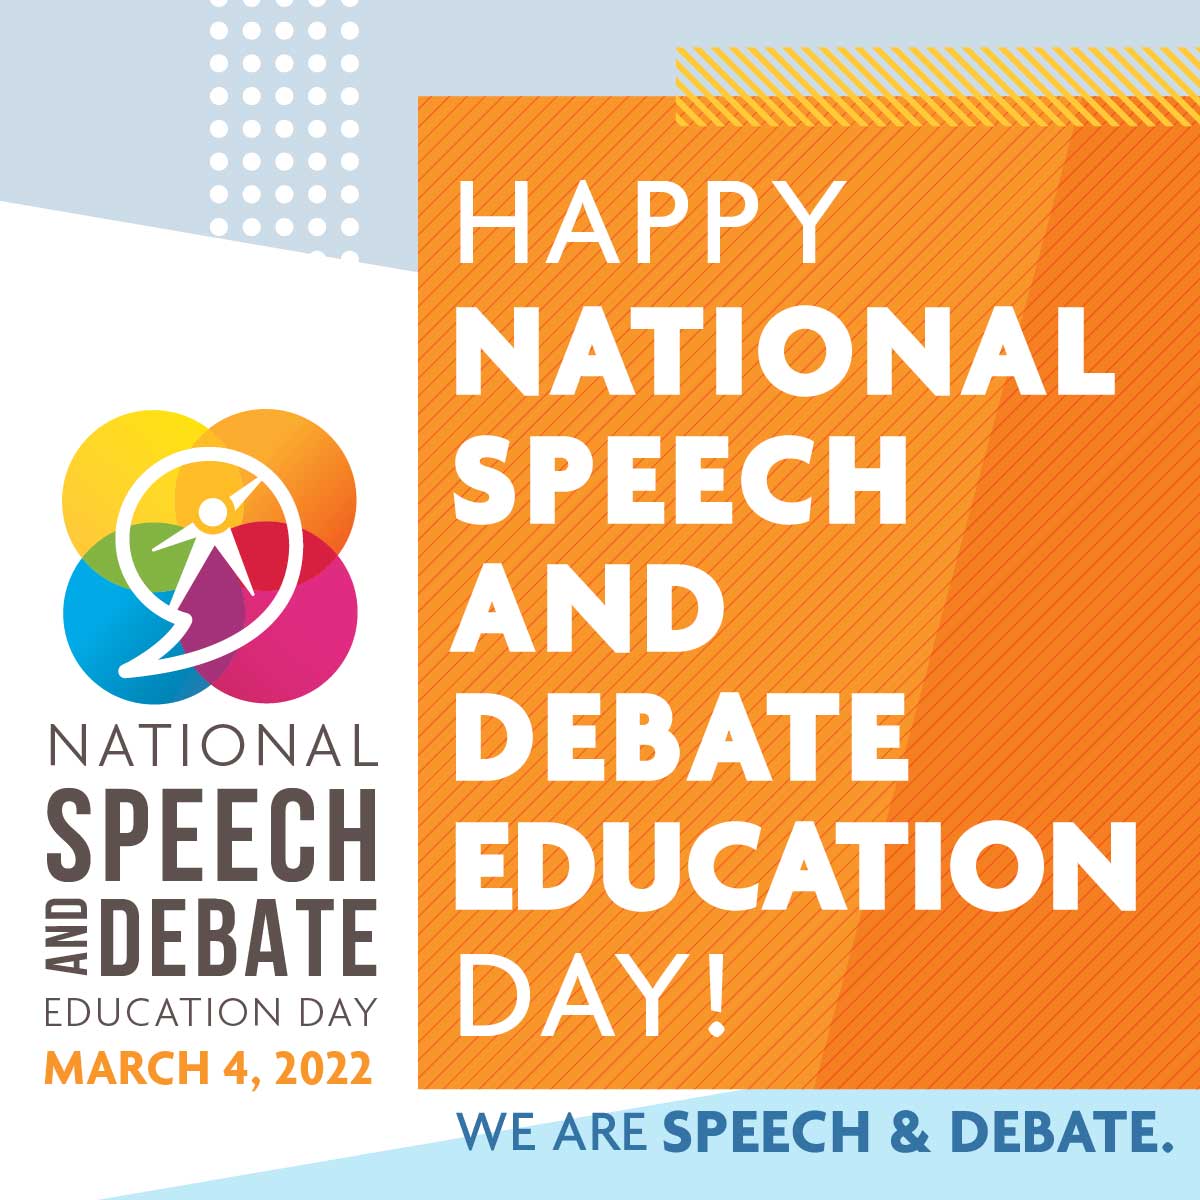 Happy National Speech and Debate Education Day!